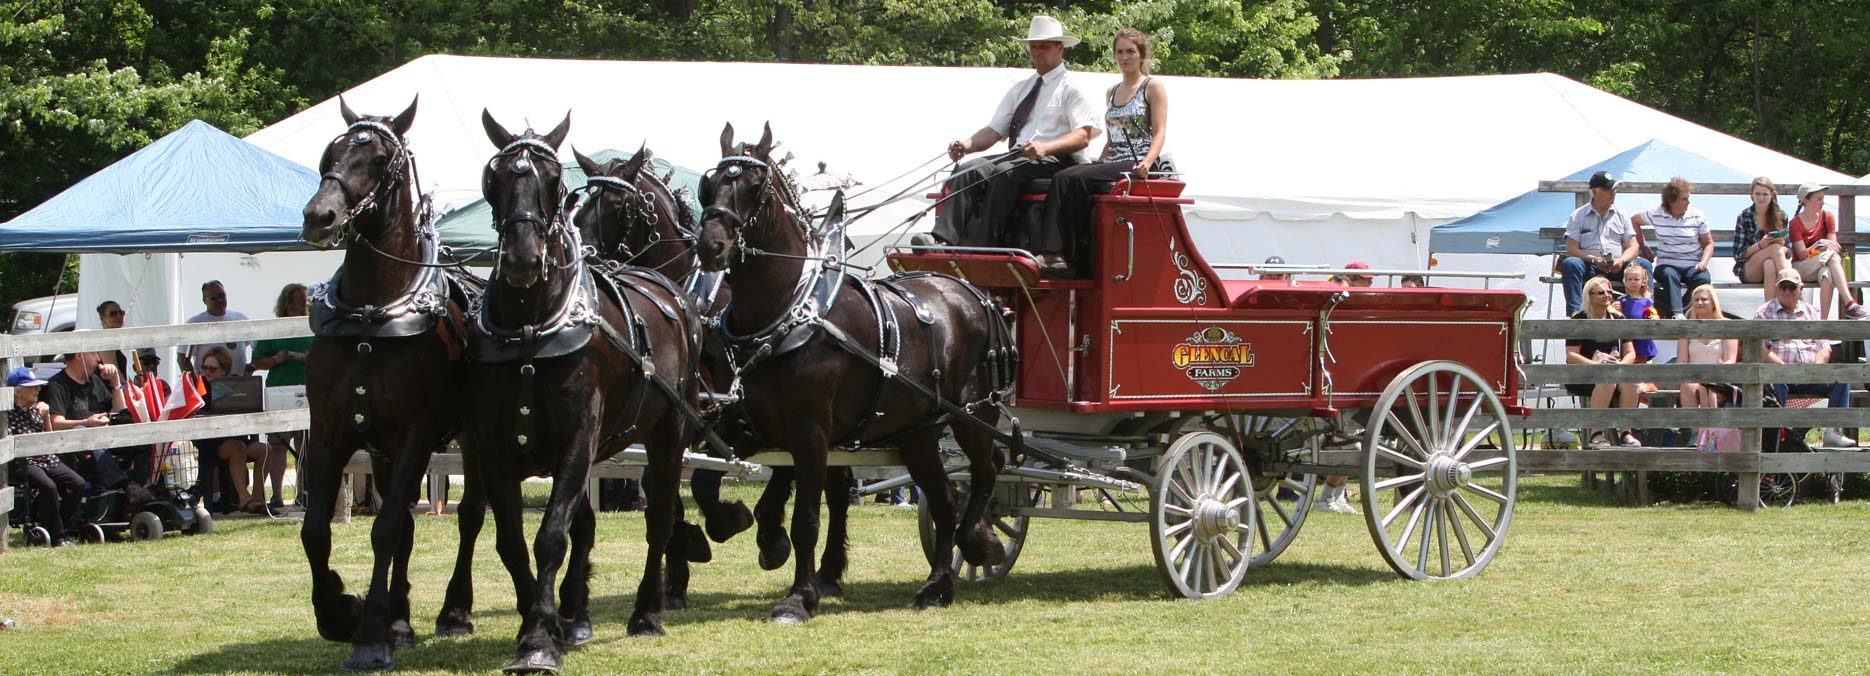 Horse Hitch Demonstrations at Schomberg Fair